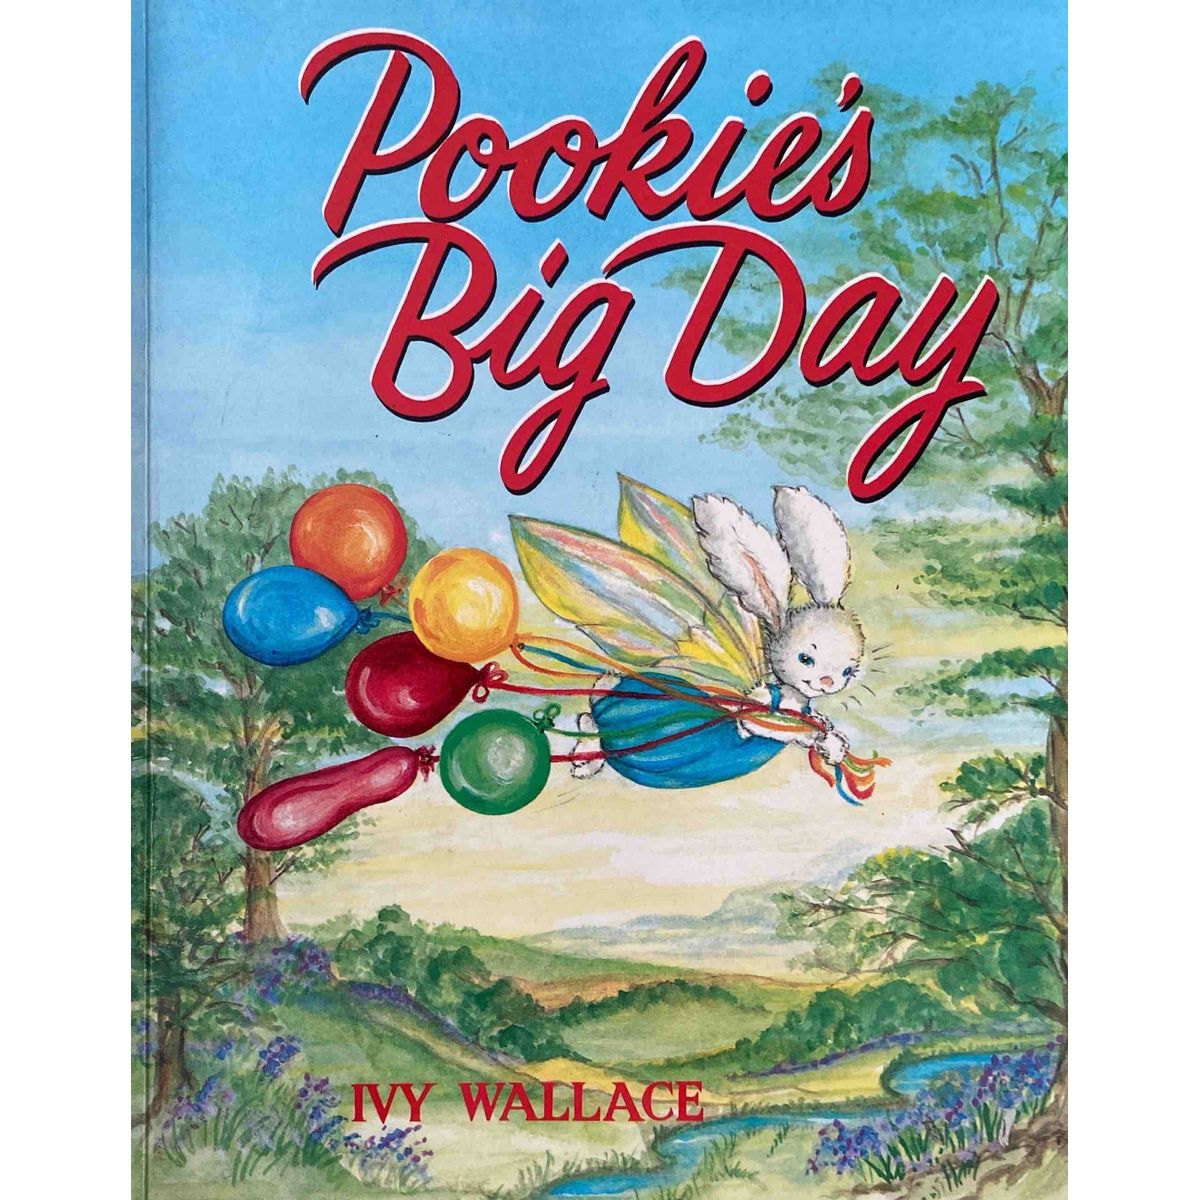 ISBN: 9781872885377 / 1872885373 - Pookie's Big Day by Ivy L. Wallace [1995]